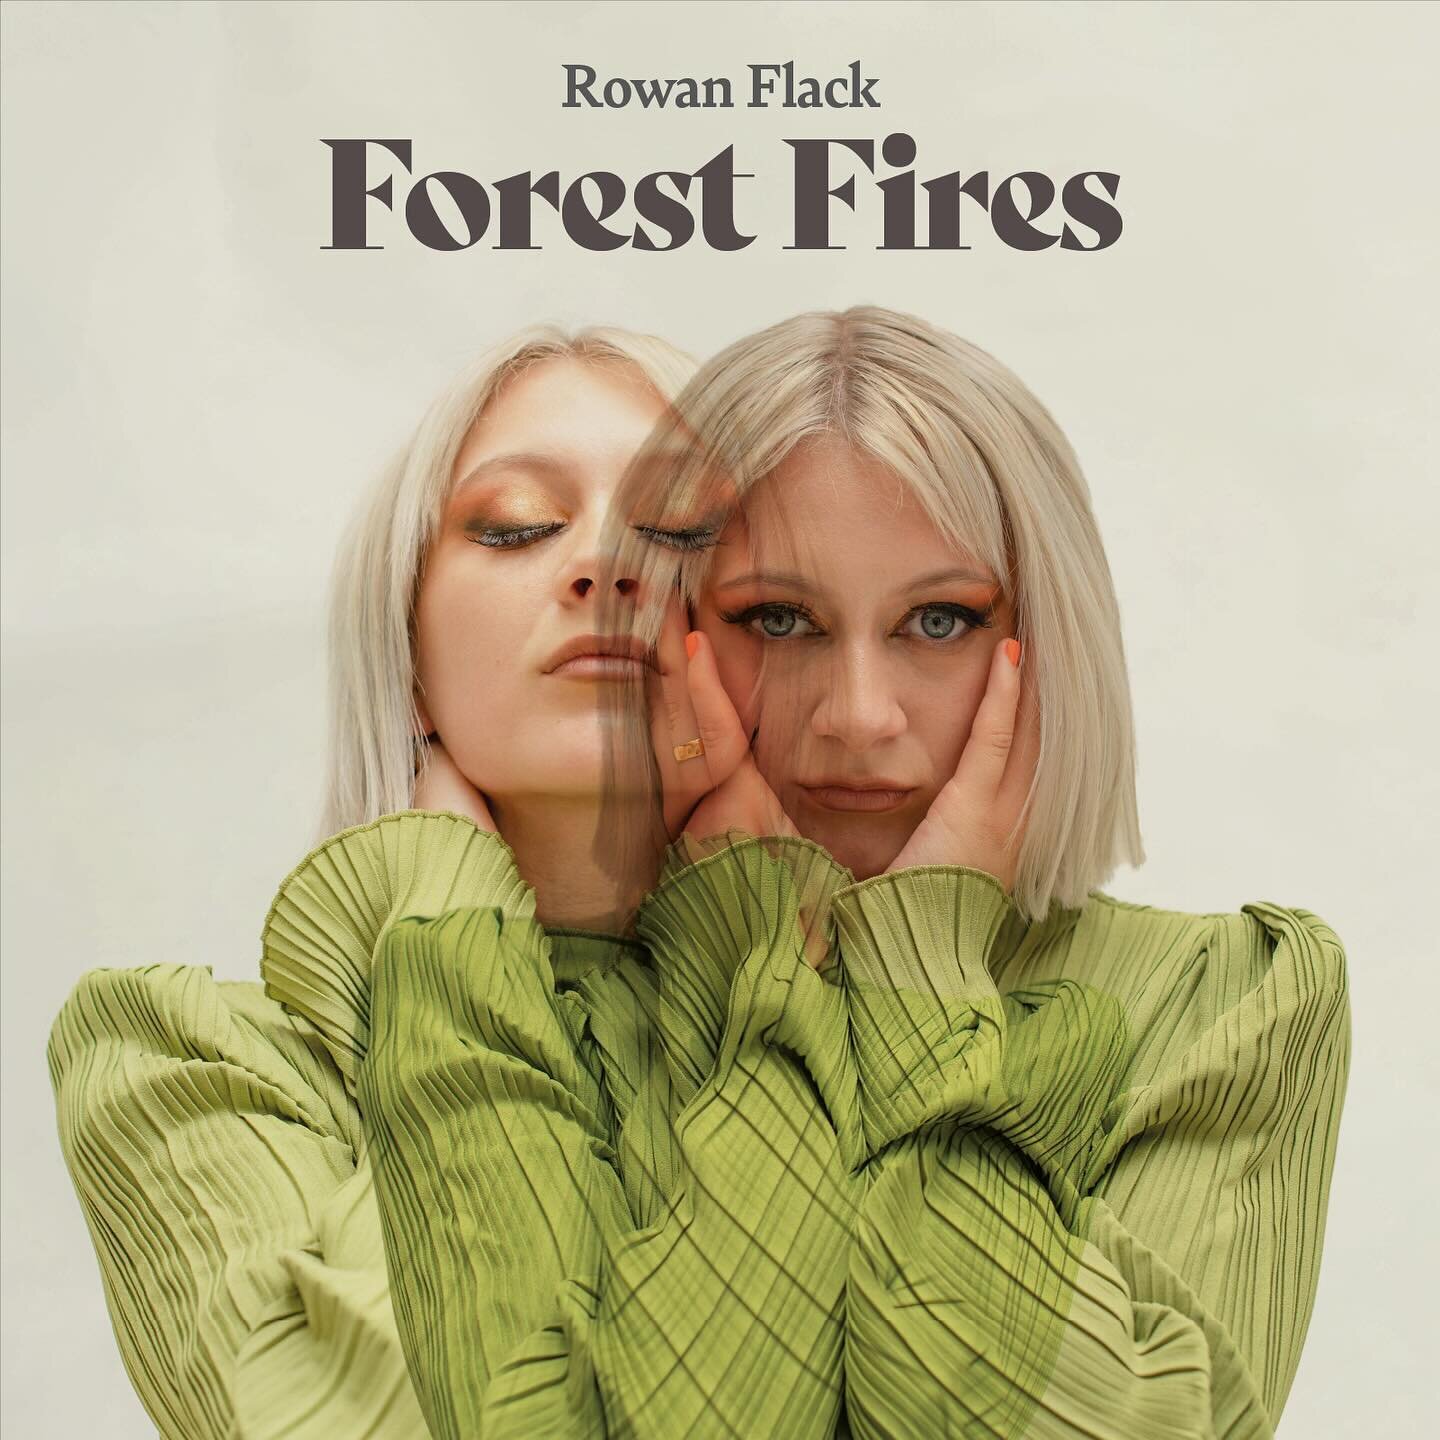 My EP Forest Fires is out today 🌹
Three years in the making !! 
I&rsquo;m so unbelievably grateful for all the musicians and creatives who have helped along the way.. and amongst the many twists and turns with this project. 
Thank you @helpmusicians